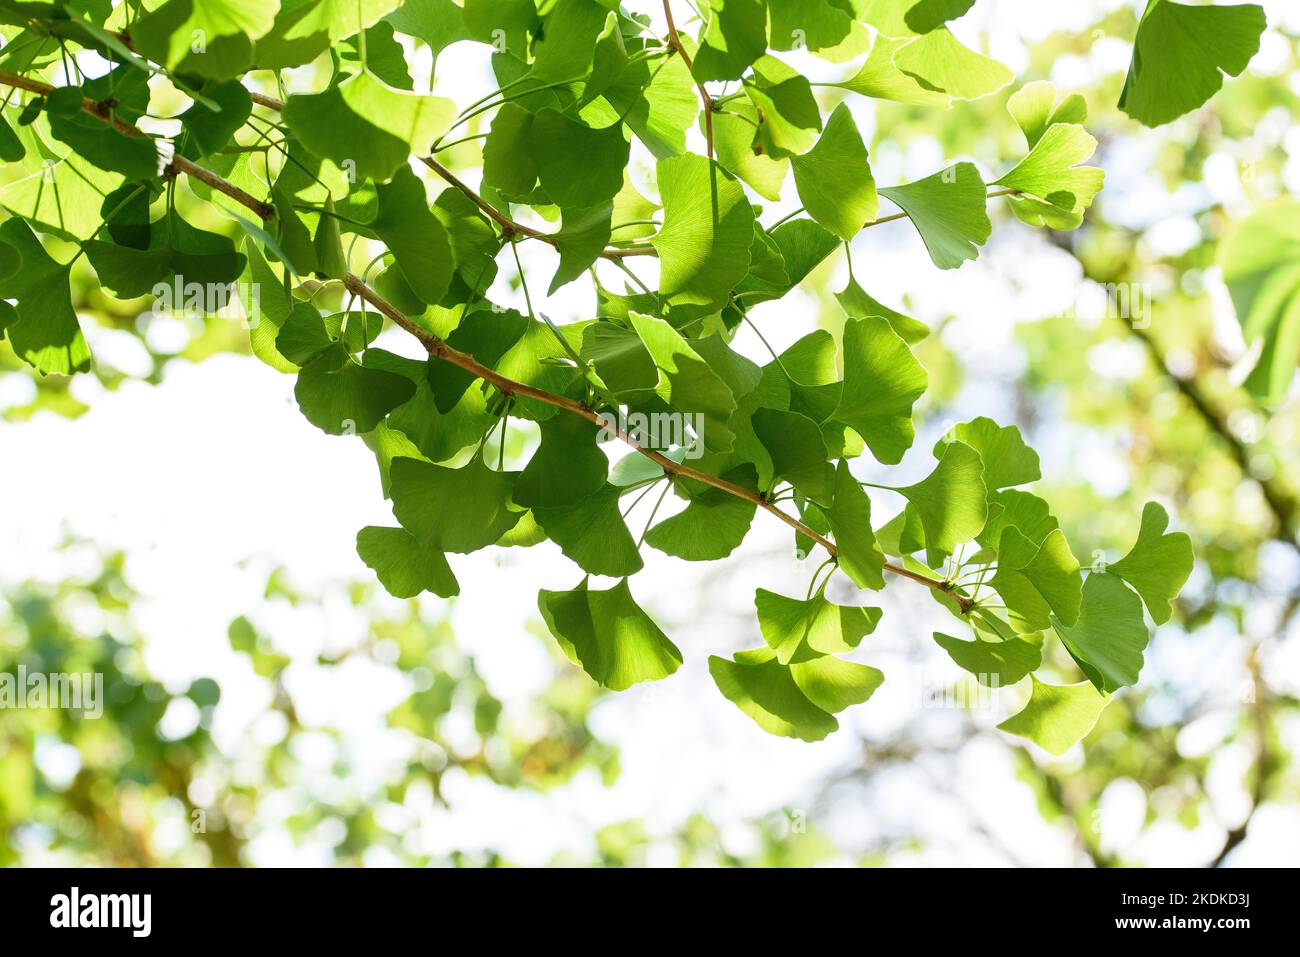 Ginkgo biloba branch with leaves on blurred background Stock Photo